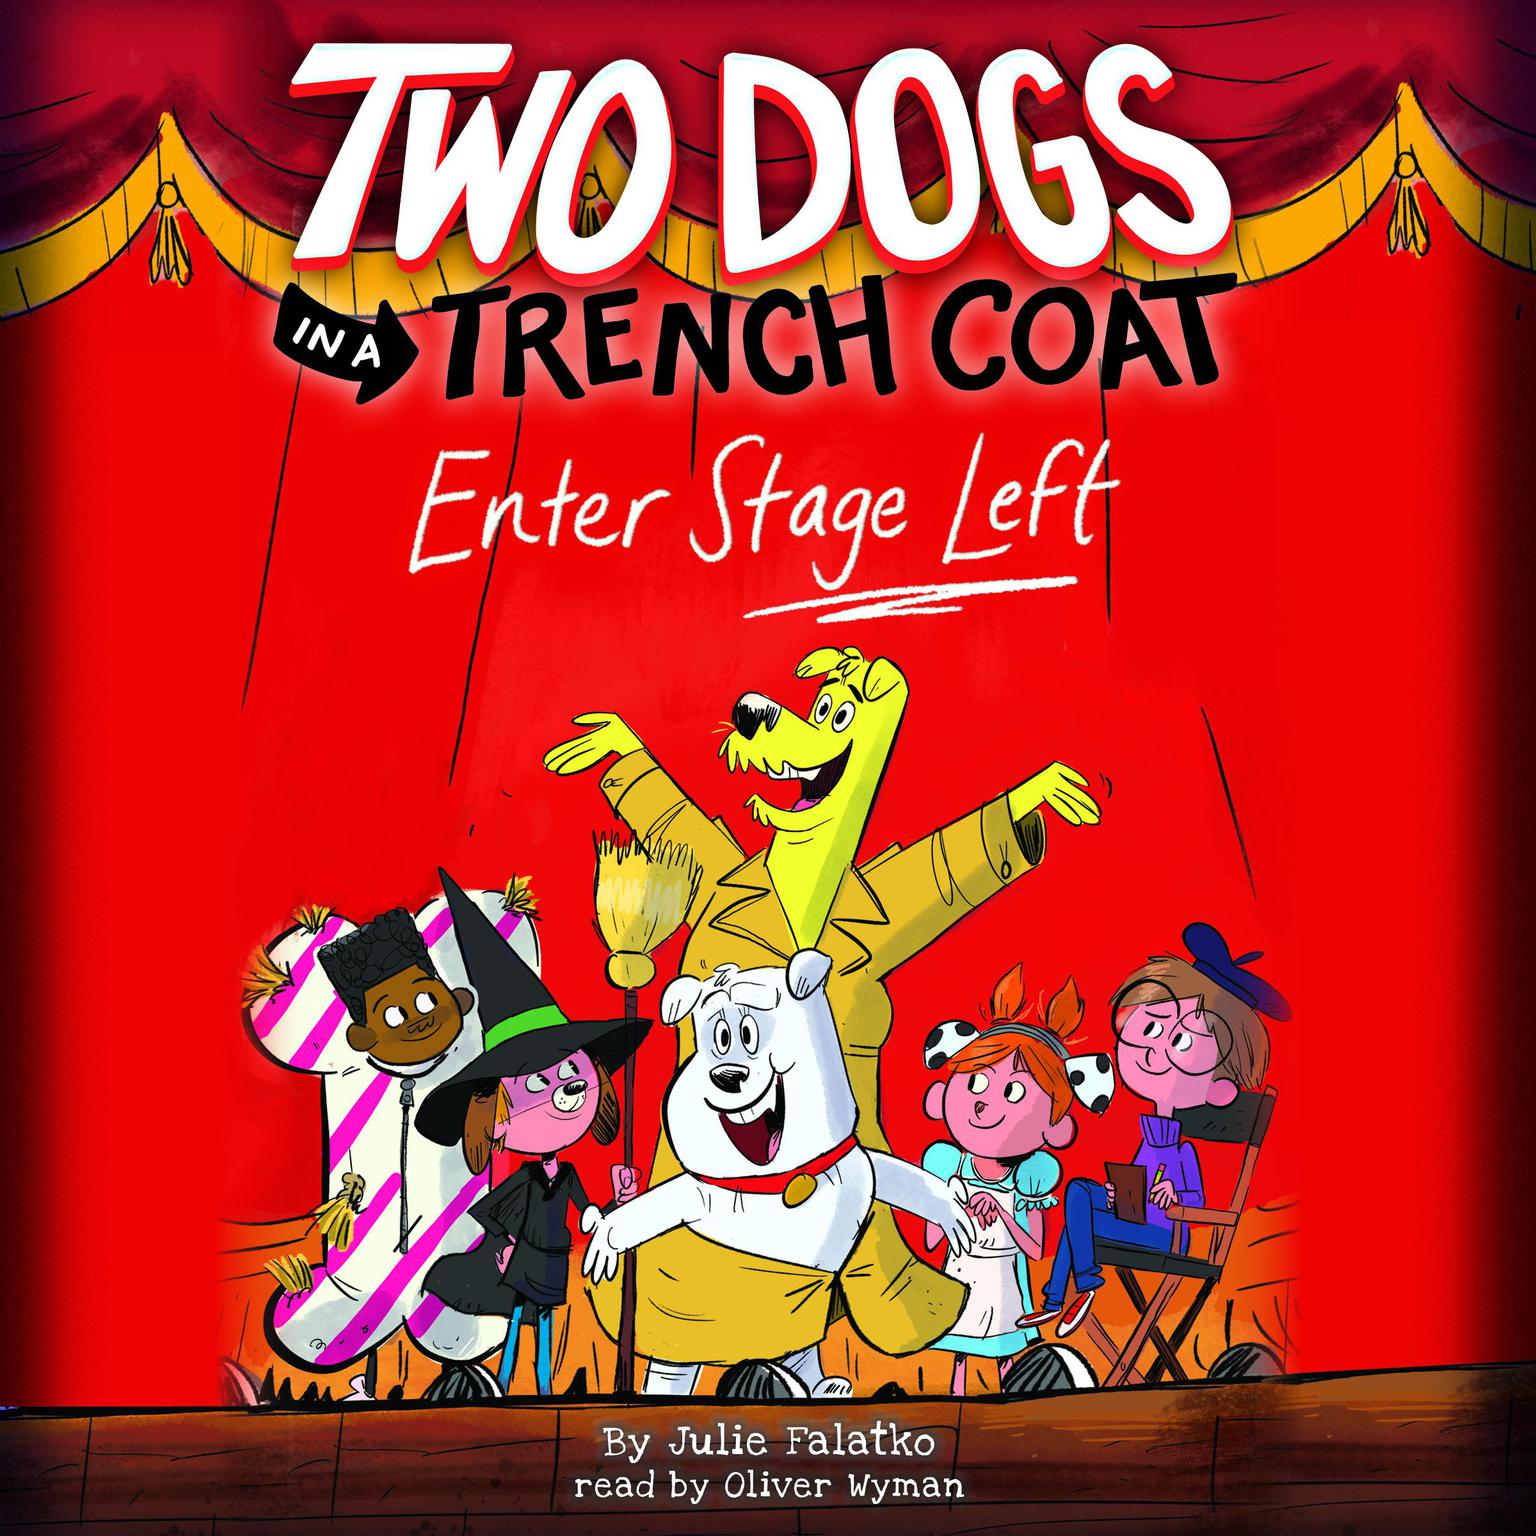 Two Dogs in a Trench Coat Enter Stage Left (Two Dogs in a Trench Coat #4) Audiobook, by Julie Falatko